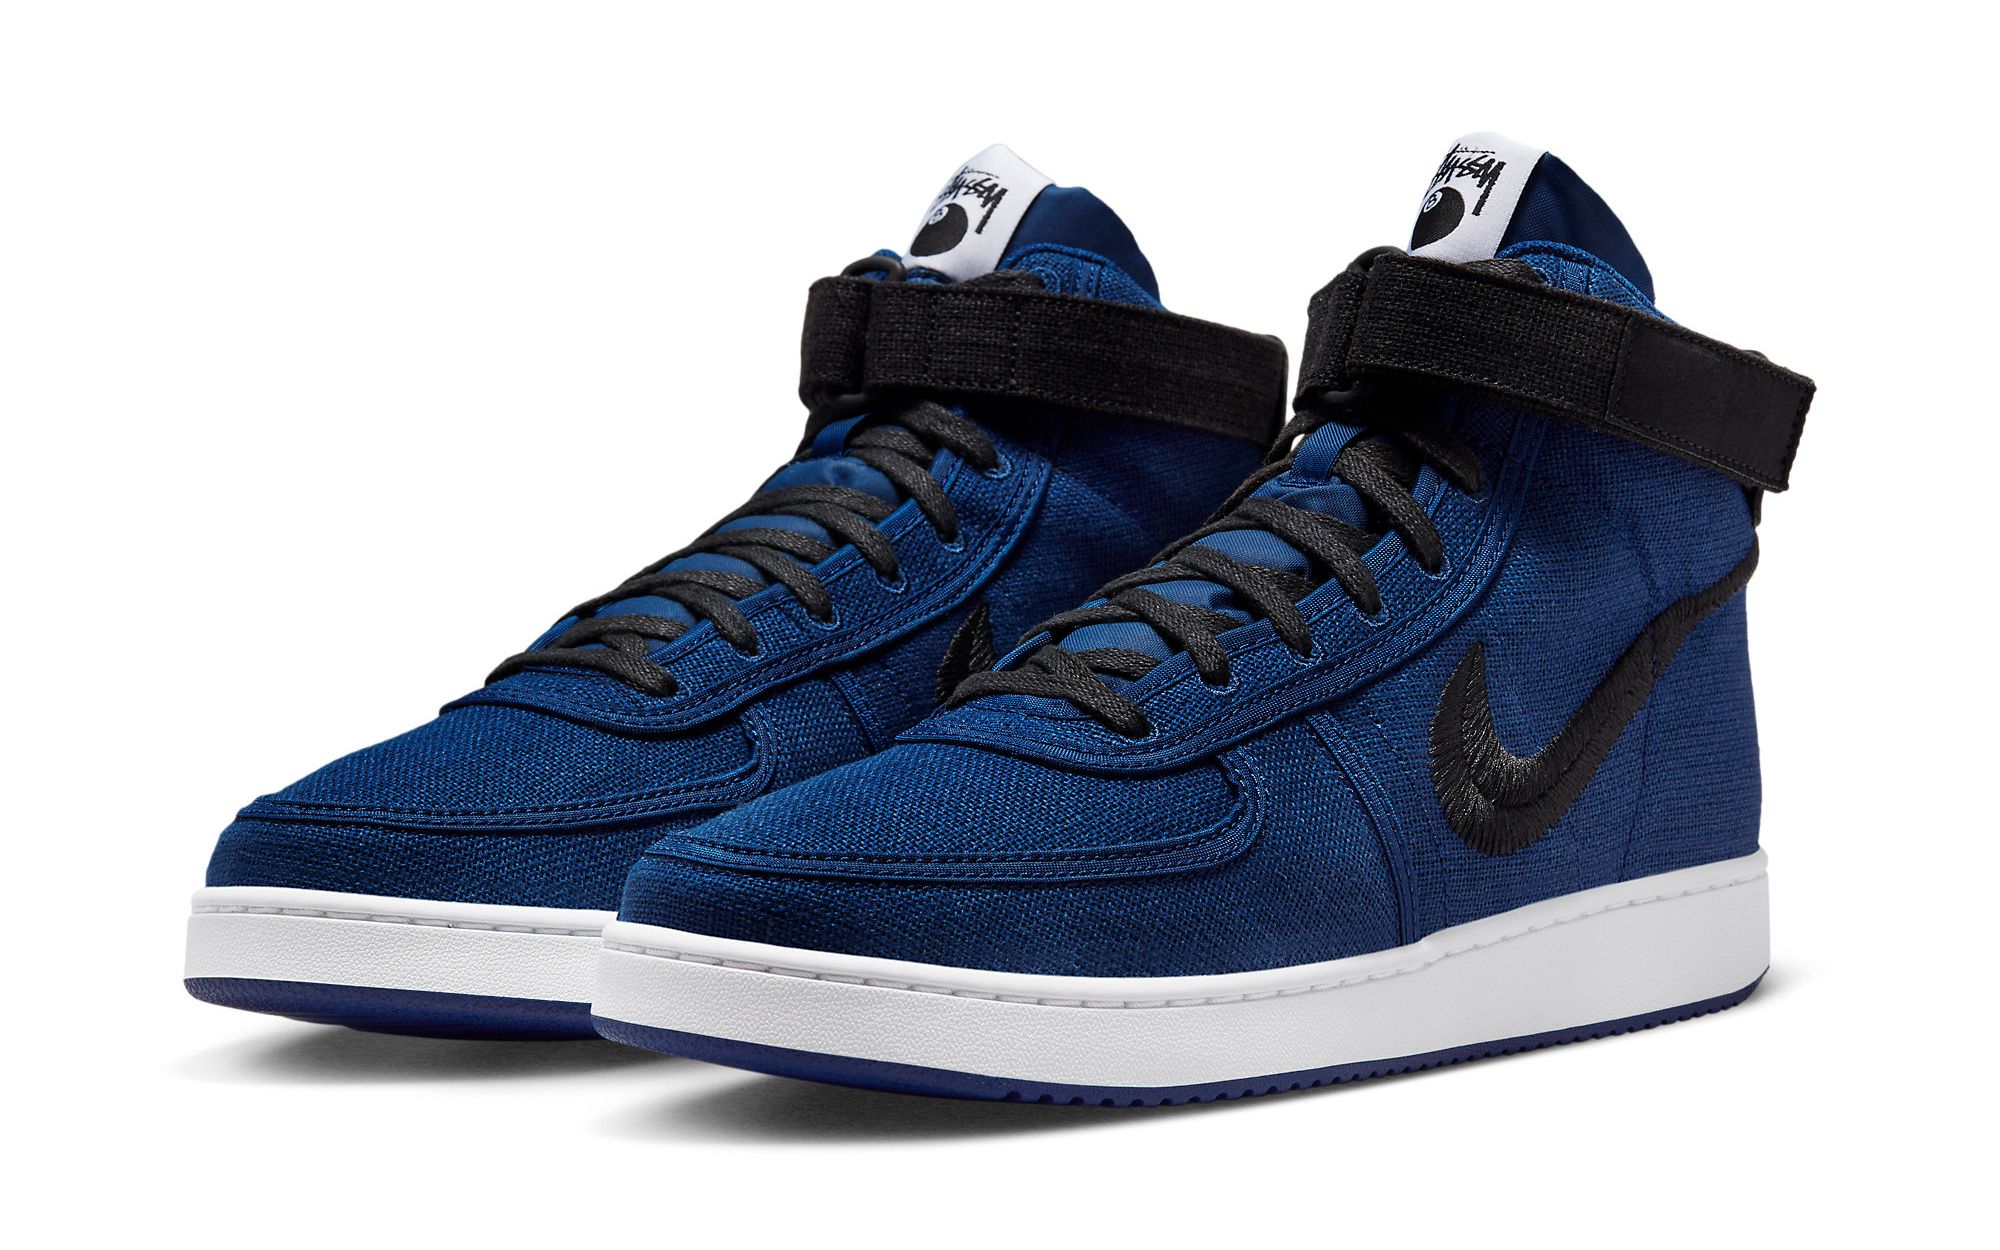 Where to Buy the Stüssy x Nike Vandal High Collection | House of Heat°